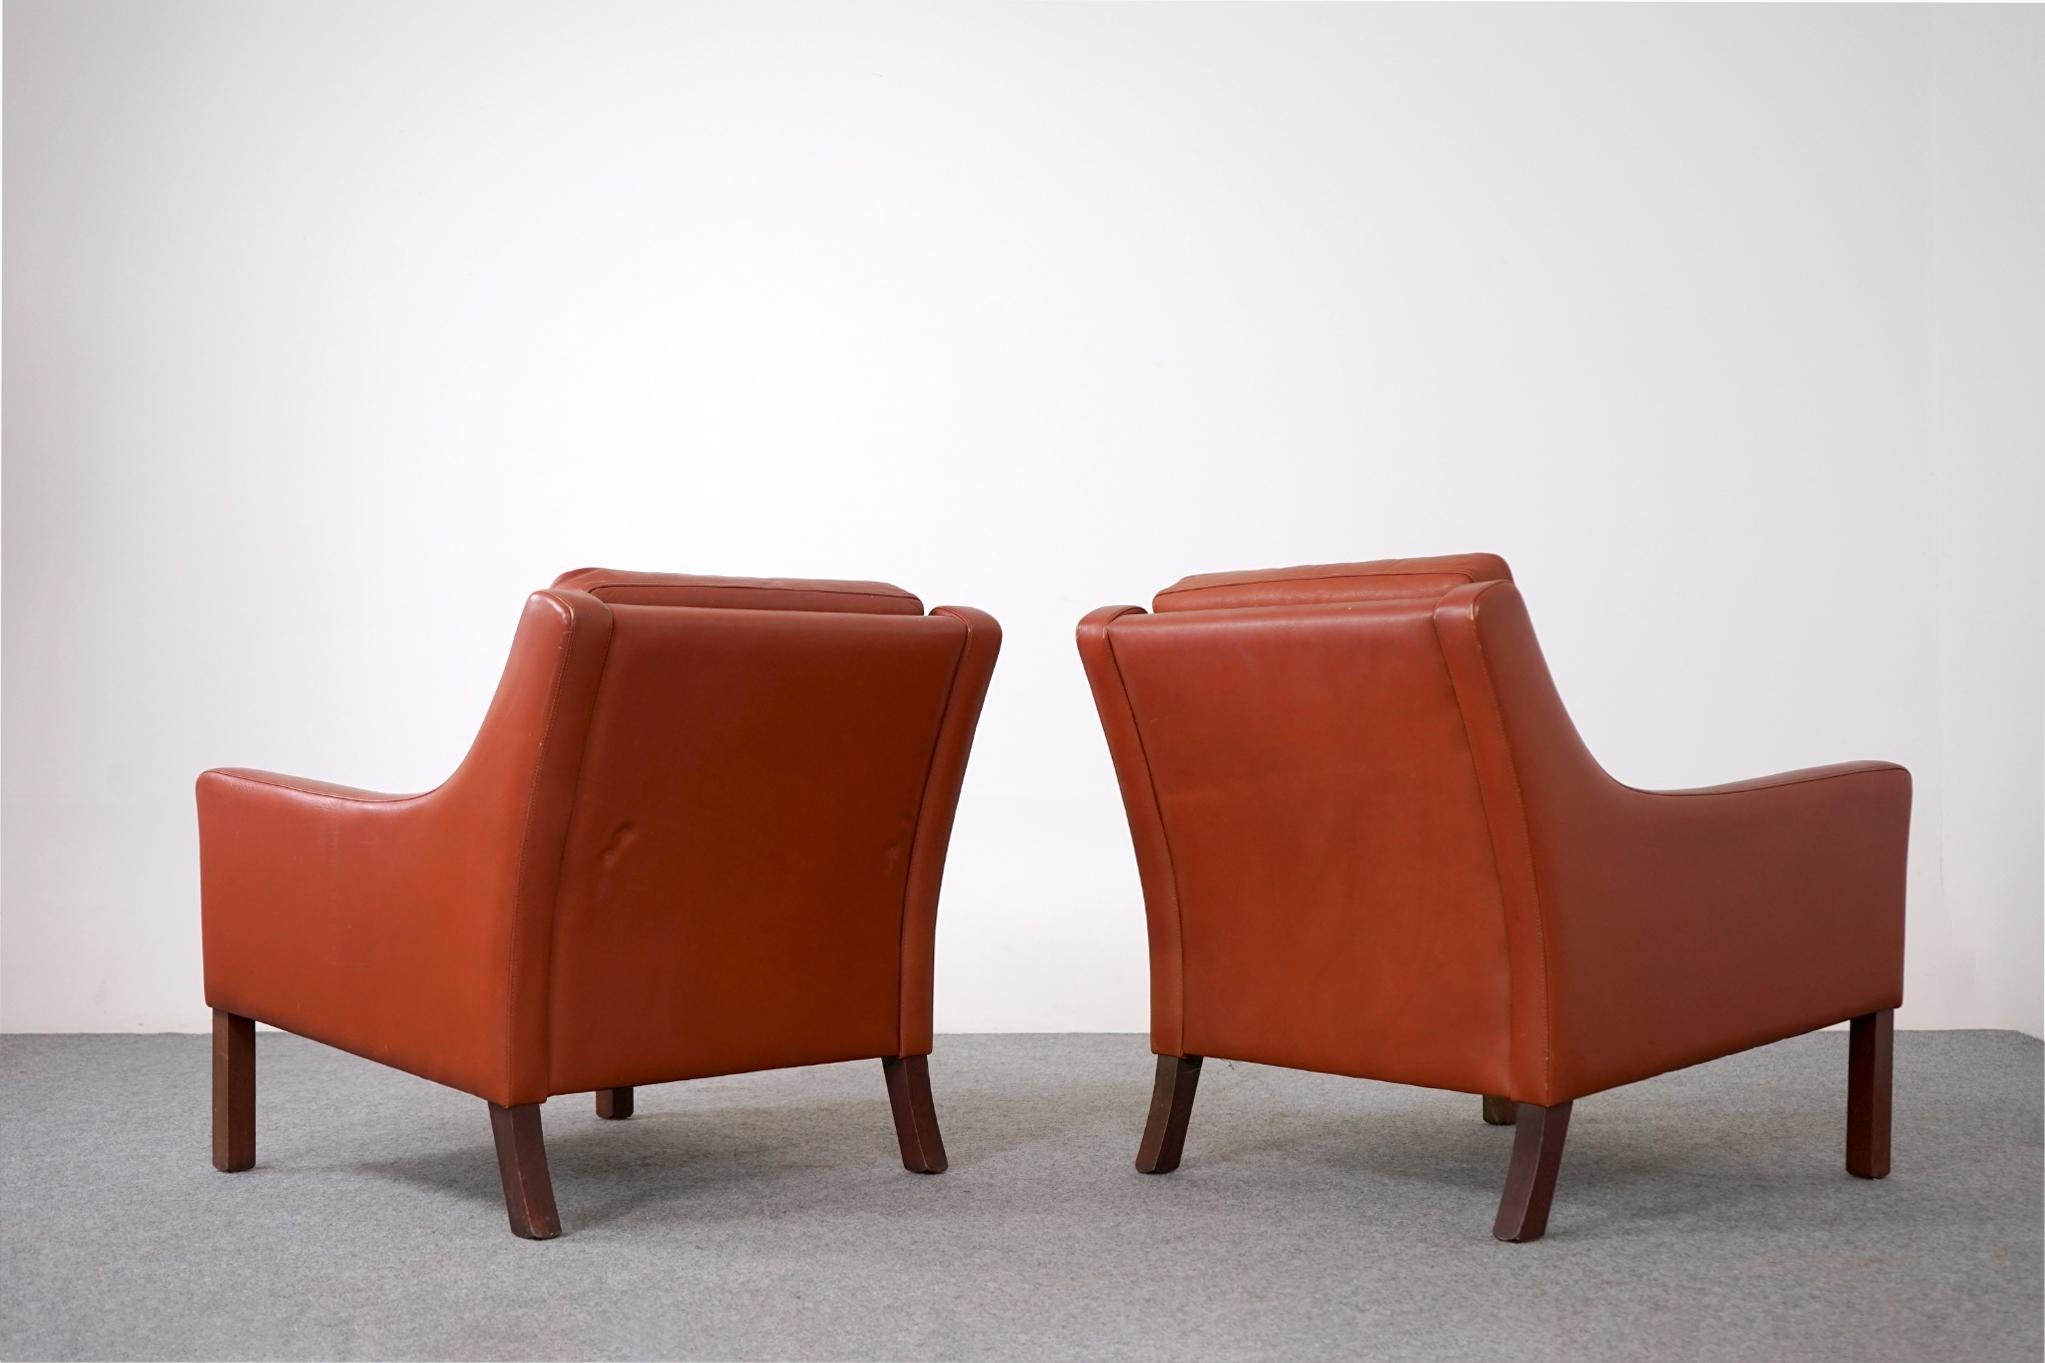 Pair of Danish Mid-Century Modern Tufted Leather Loungers For Sale 2